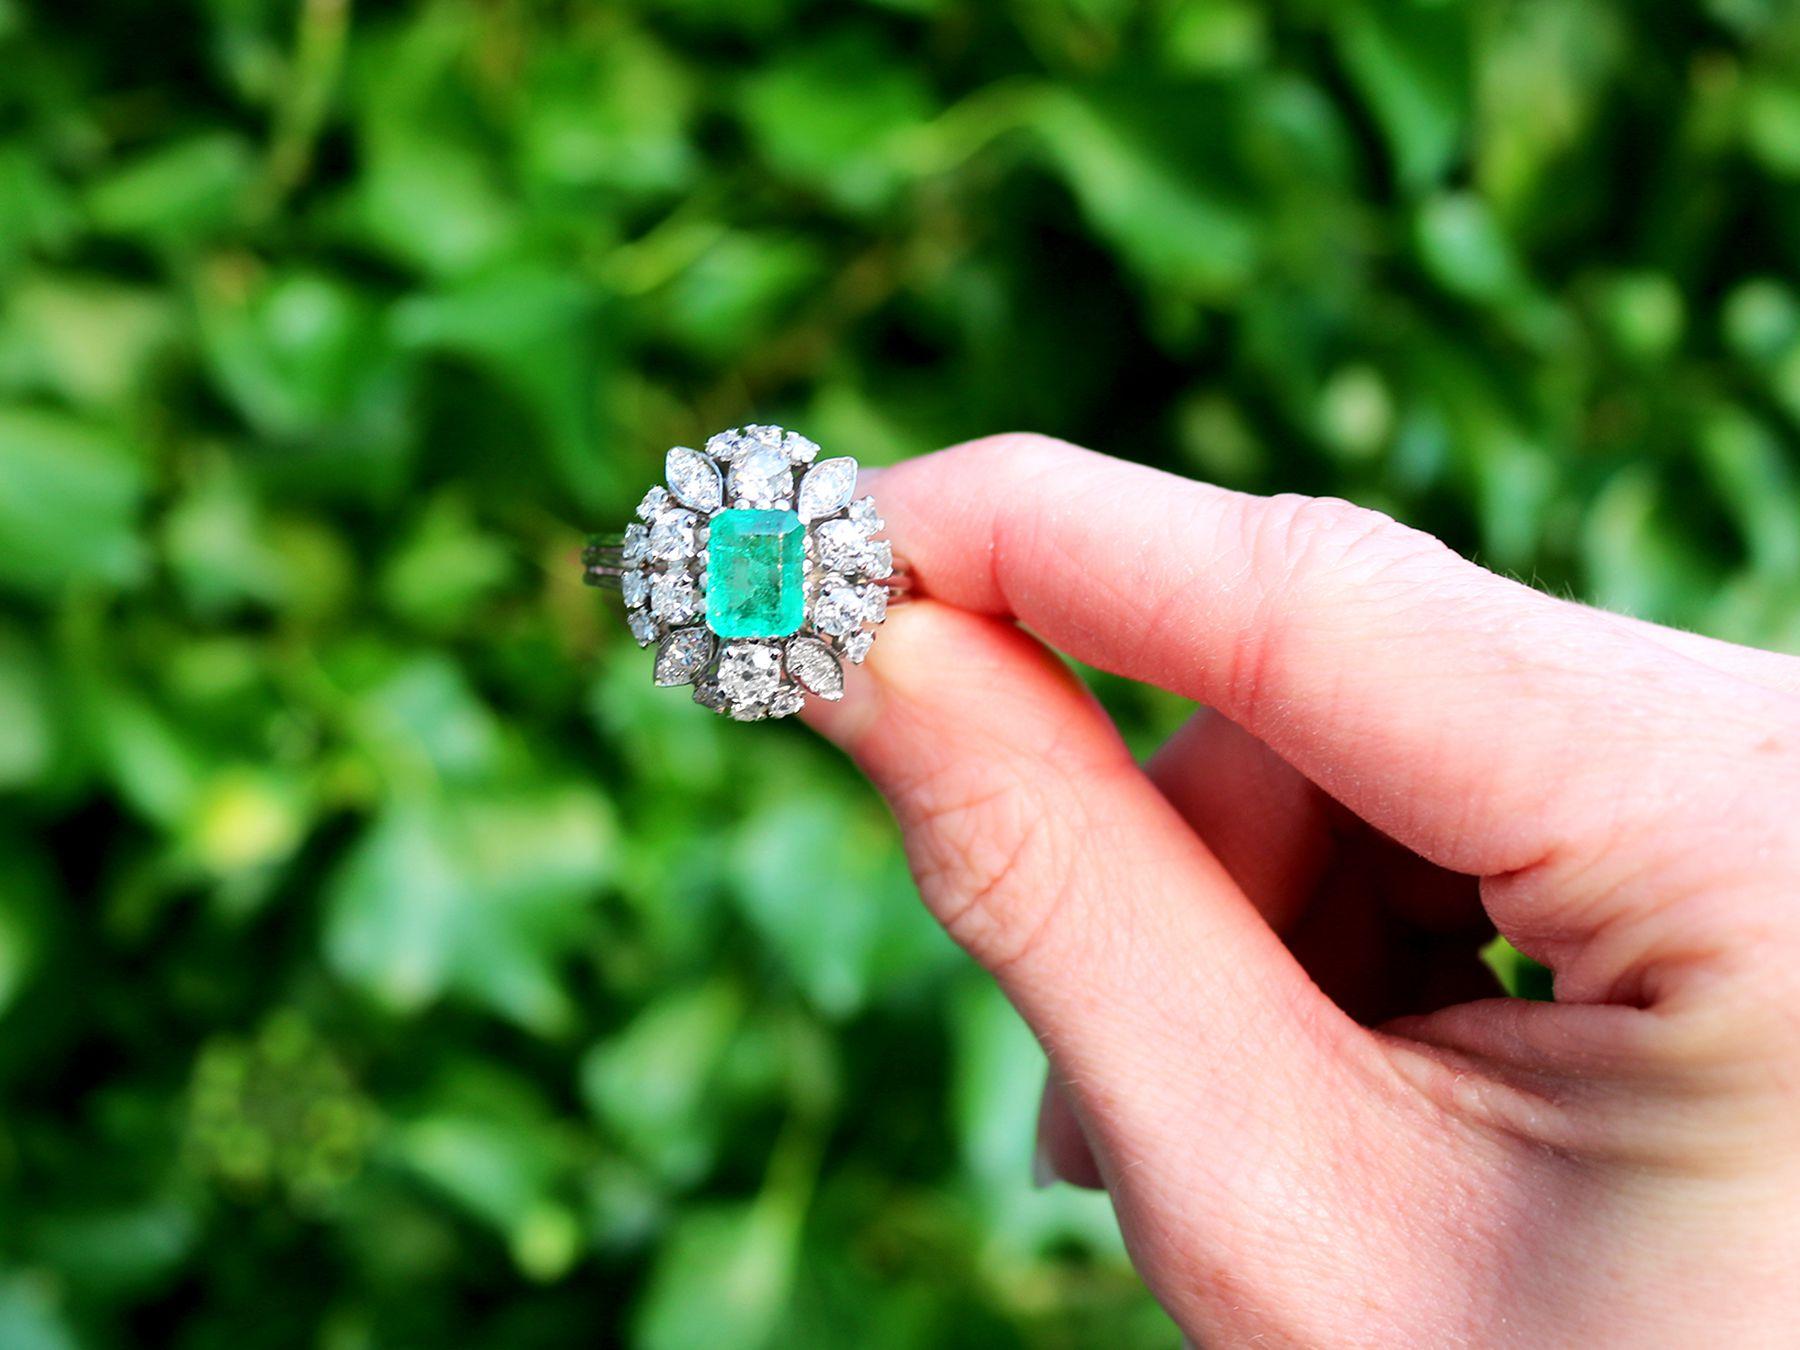 A stunning, fine and impressive antique 2.05 carat emerald and 1.99 carat diamond, platinum dress ring; part of our diverse antique jewelry collections.

This stunning, fine and impressive emerald and diamond cluster ring has been crafted in